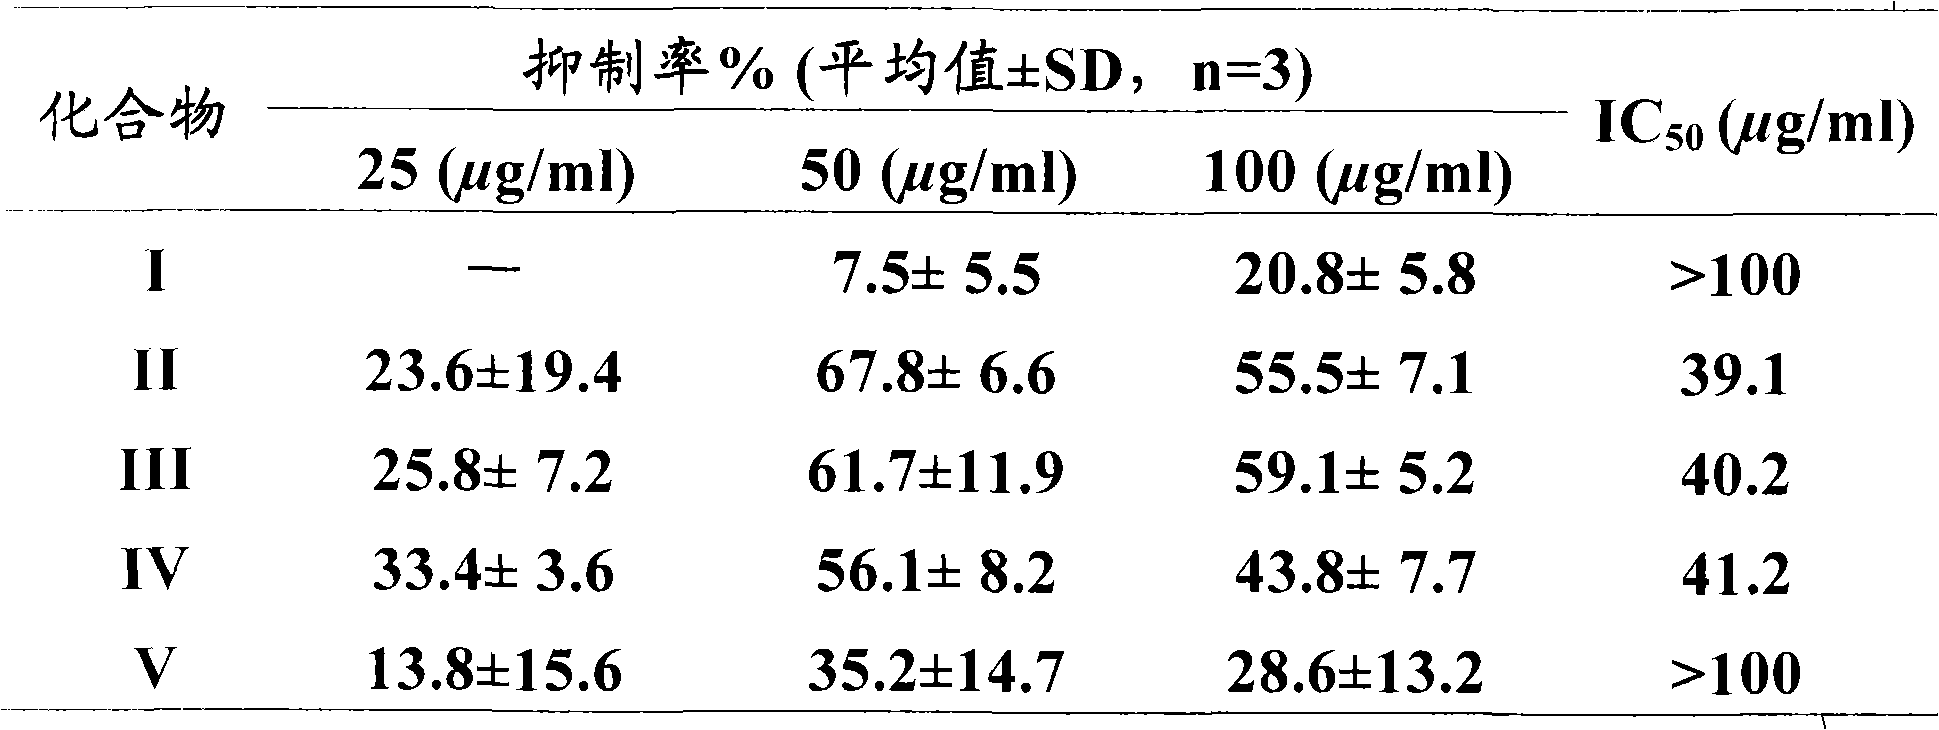 Preparation method and application of galloyl glucose compounds